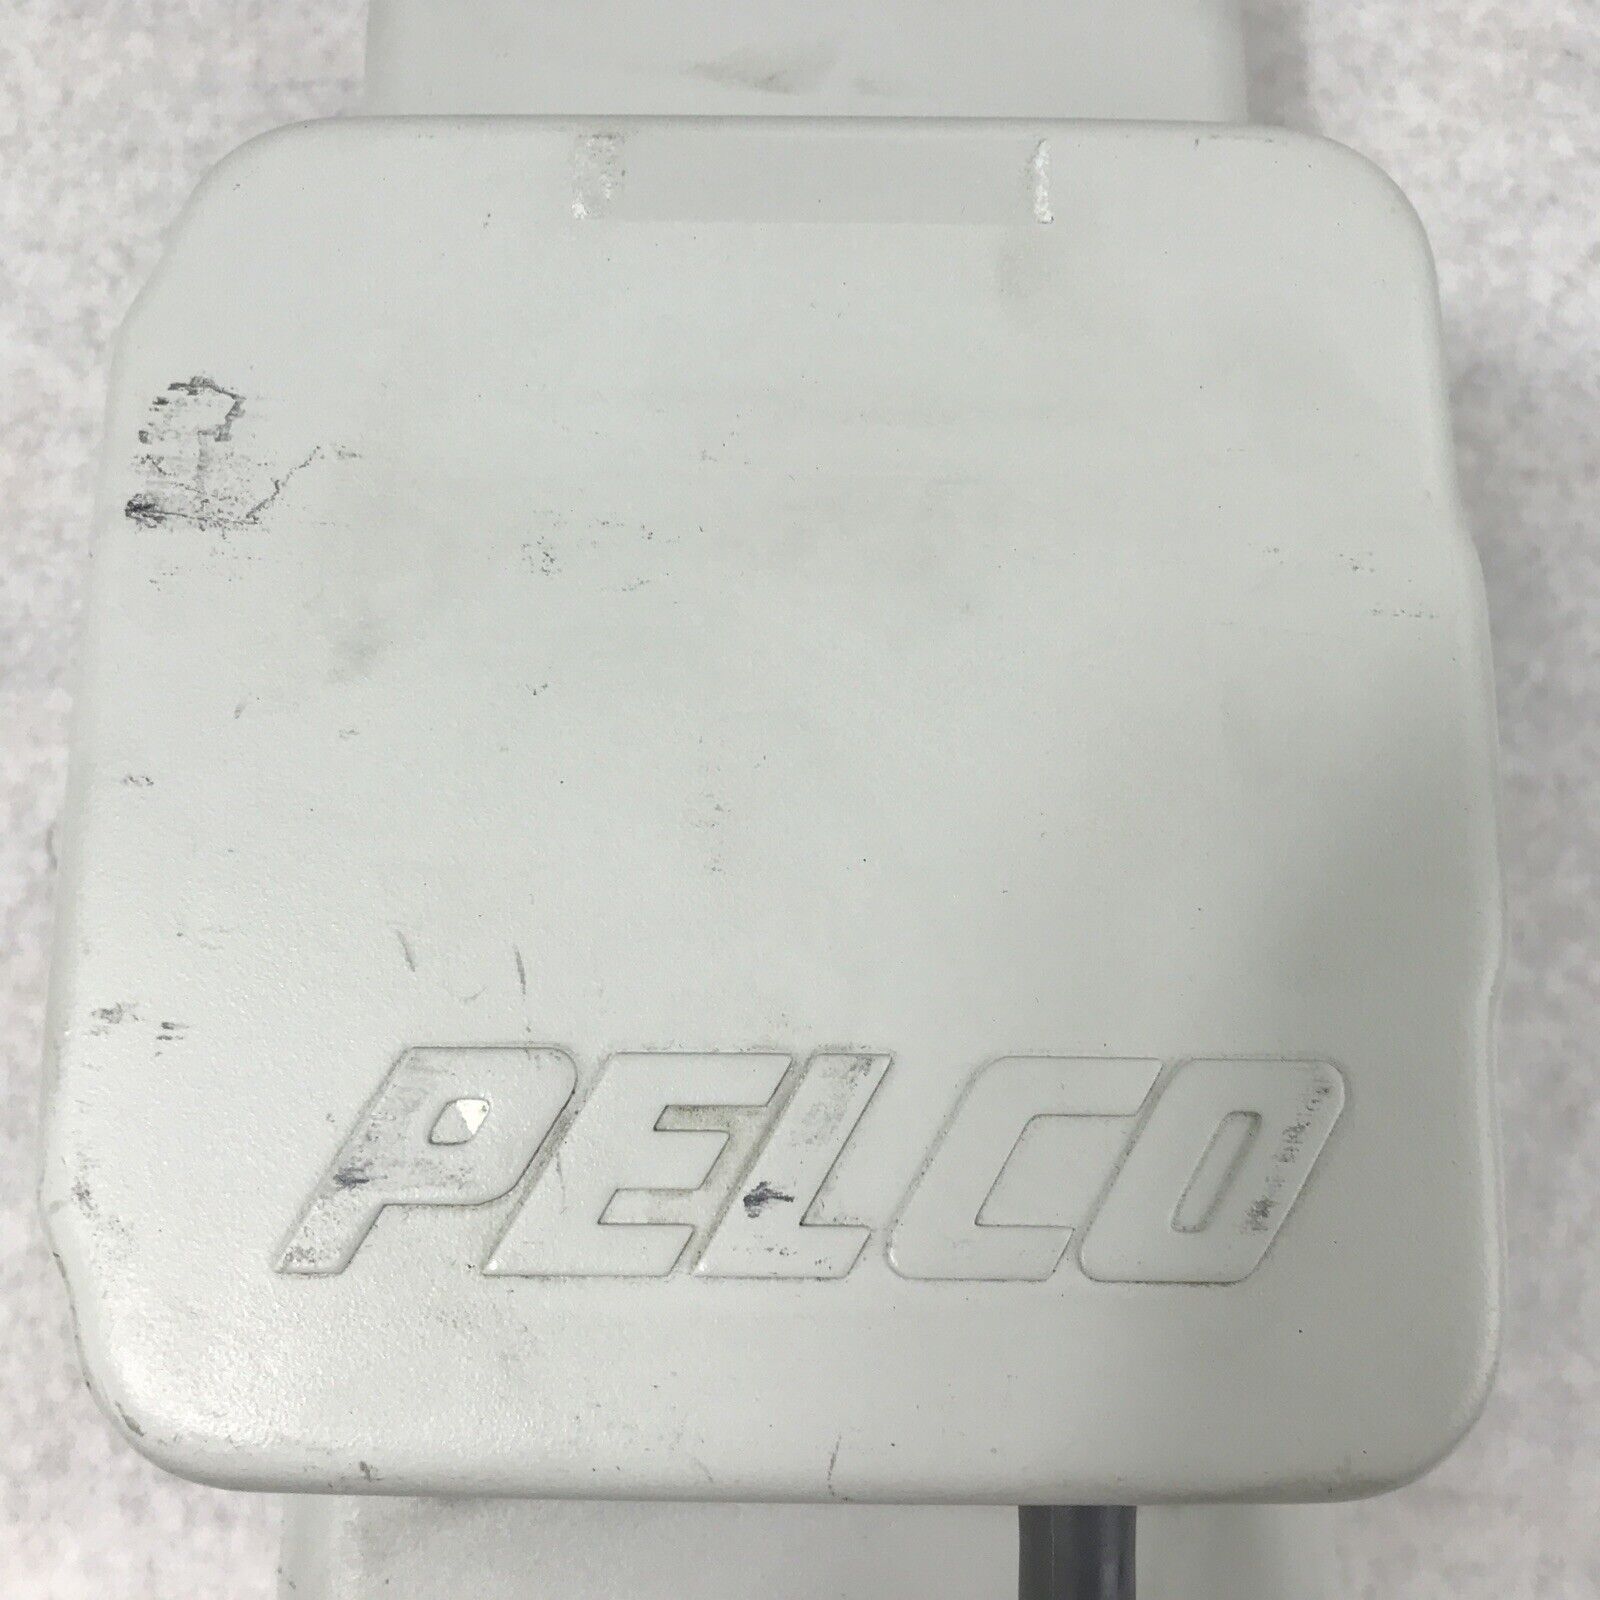 Pelco PA402 Pole Adapter for LWM41 or IWM Mount w/ Power Supply WCSL-4